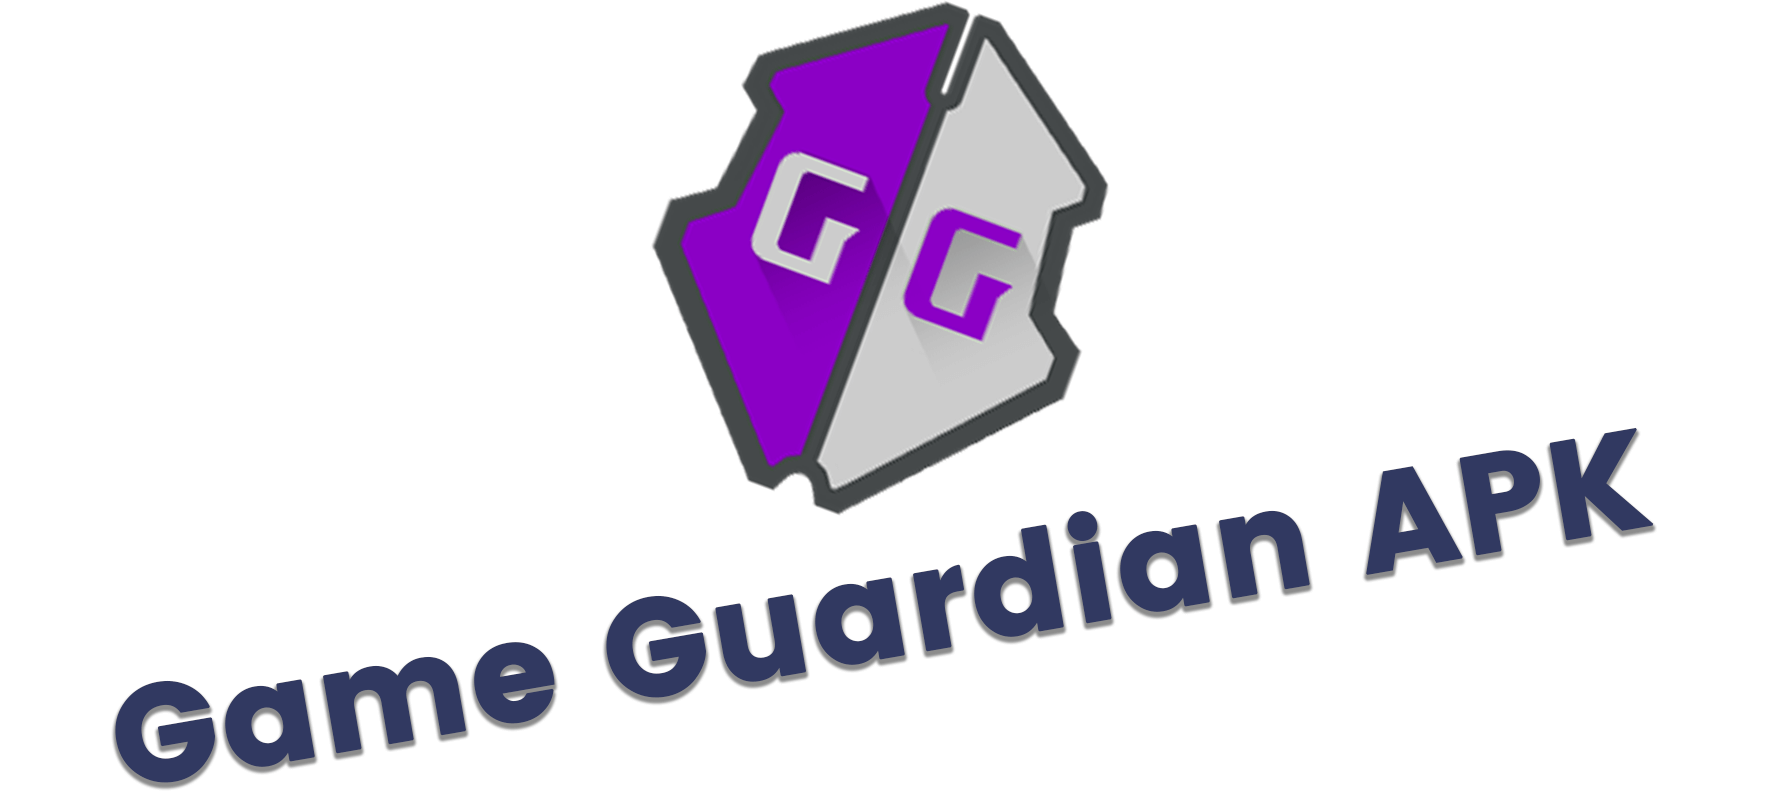 Download game guardian 881 apk android